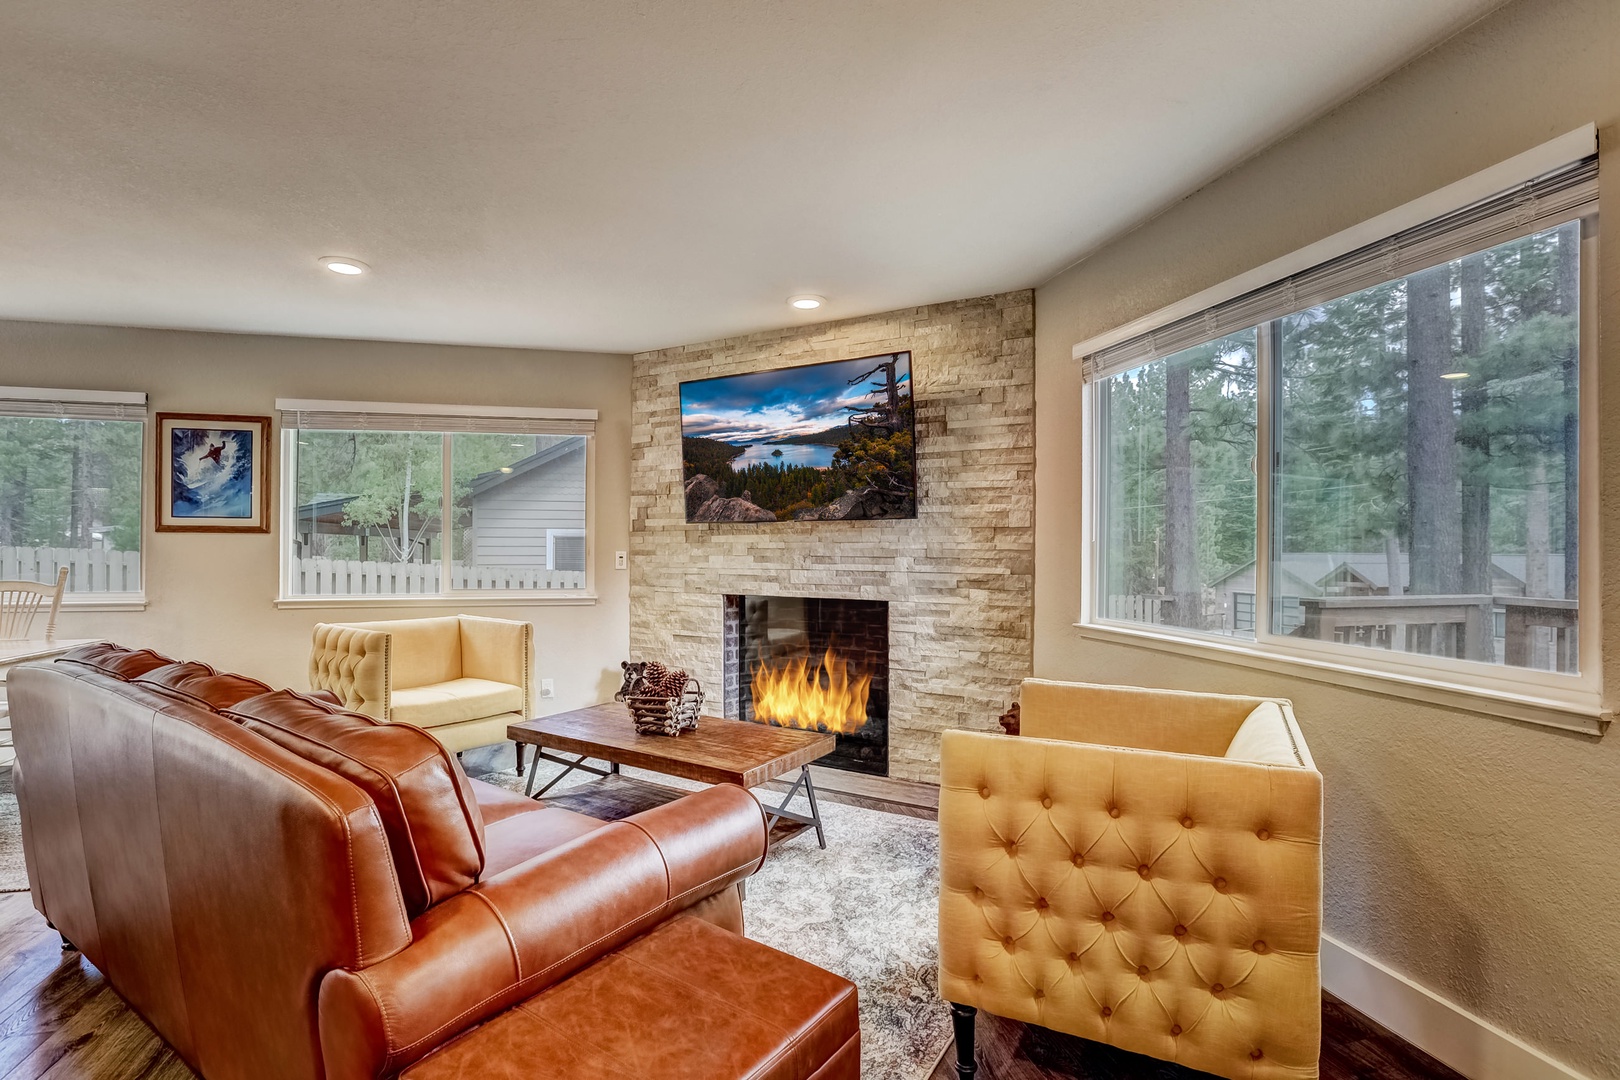 Living room with comfortable seating around a gas fireplace and Smart TV